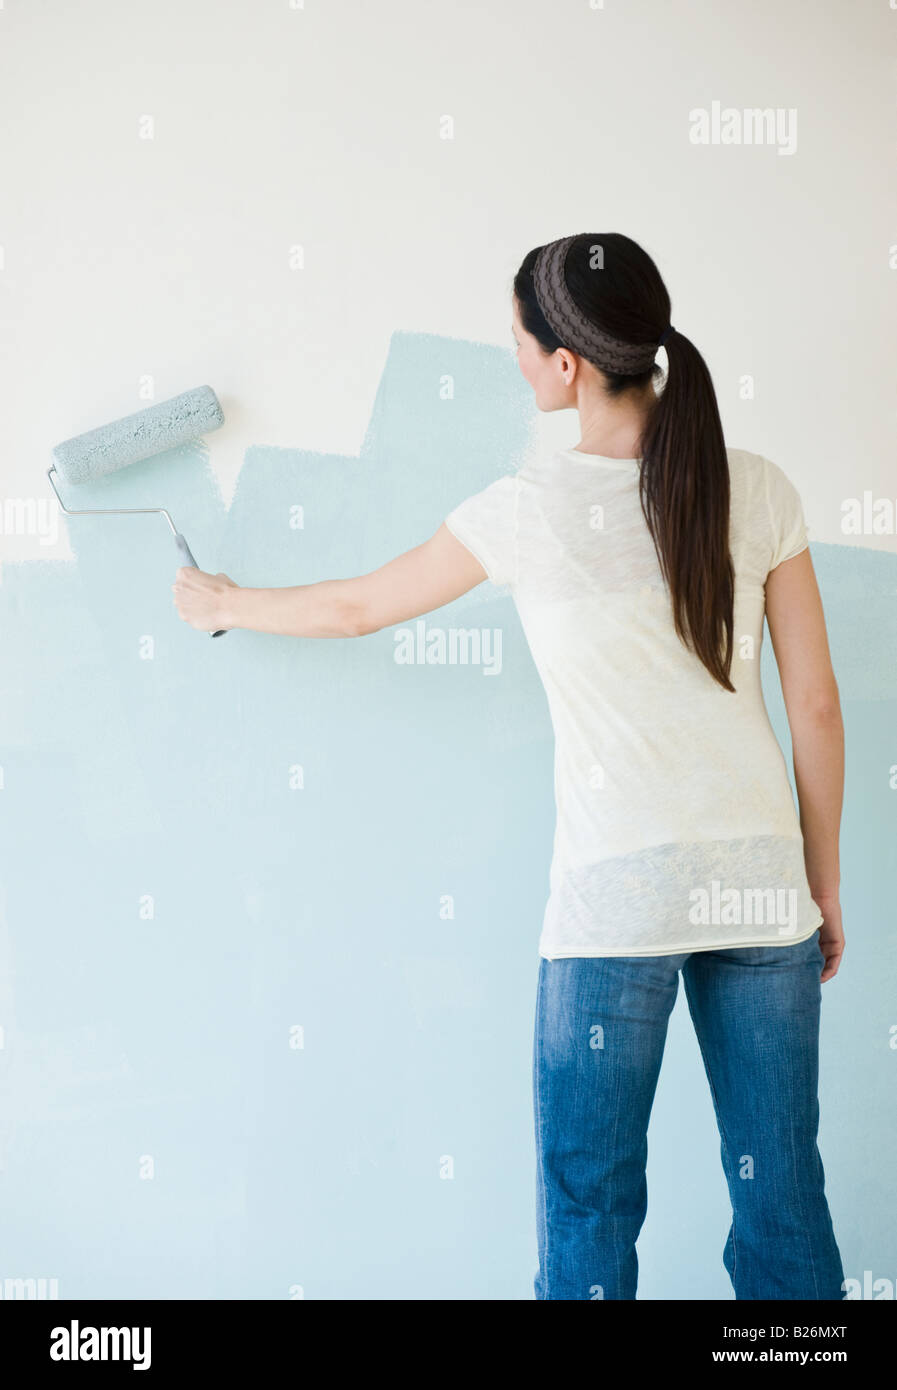 Woman painting wall with paint roller Stock Photo